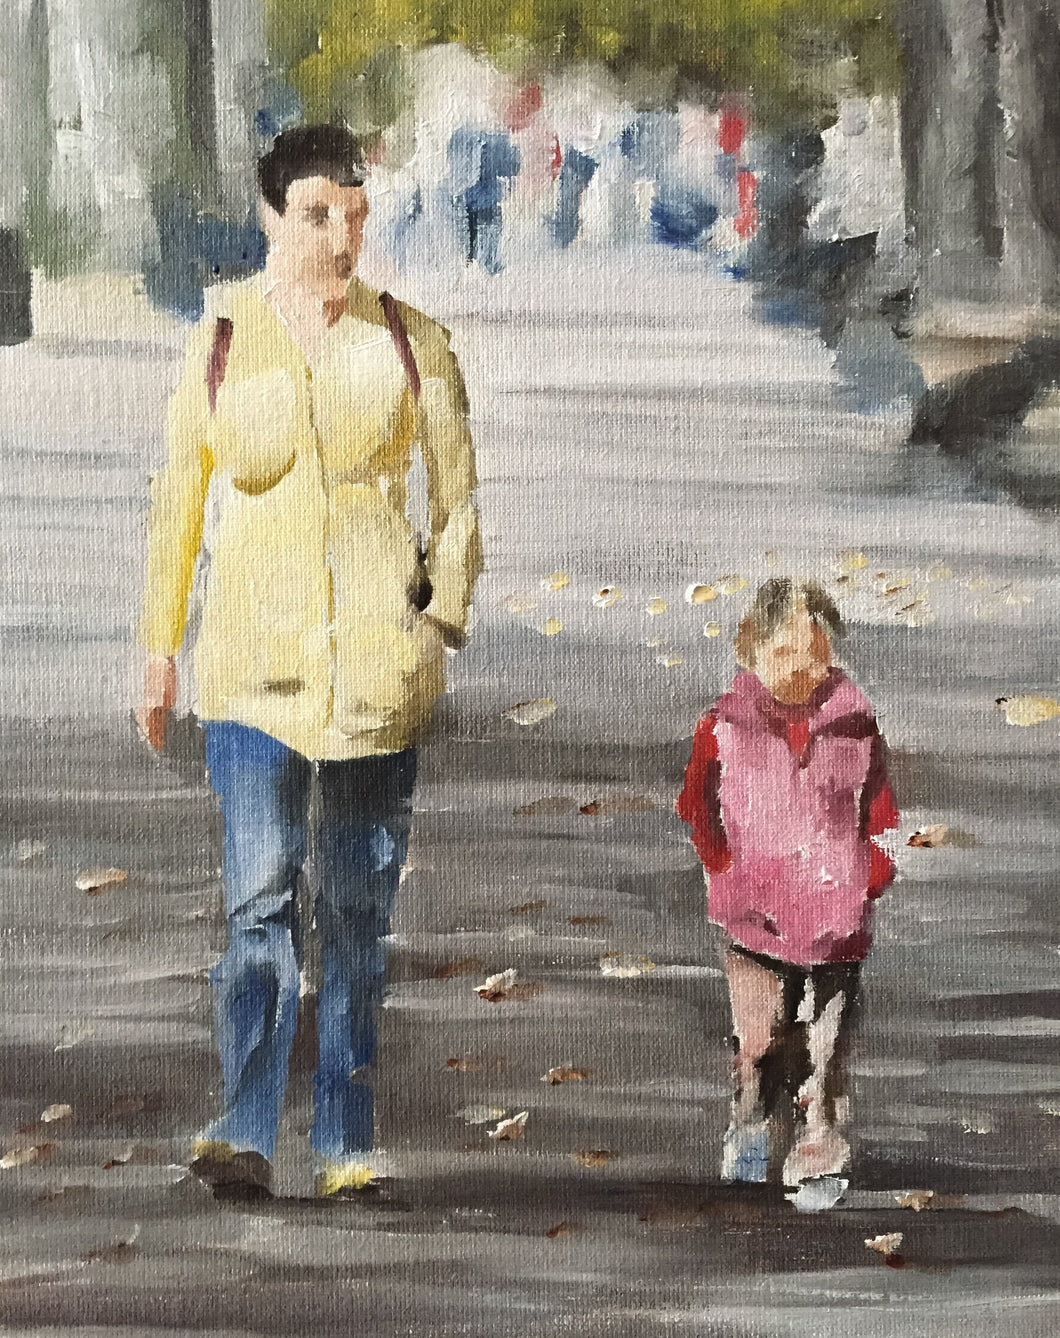 Mother and daughter Painting, Poster, Wall art, Prints, Commissions, Fine Art - from original oil painting by James Coates